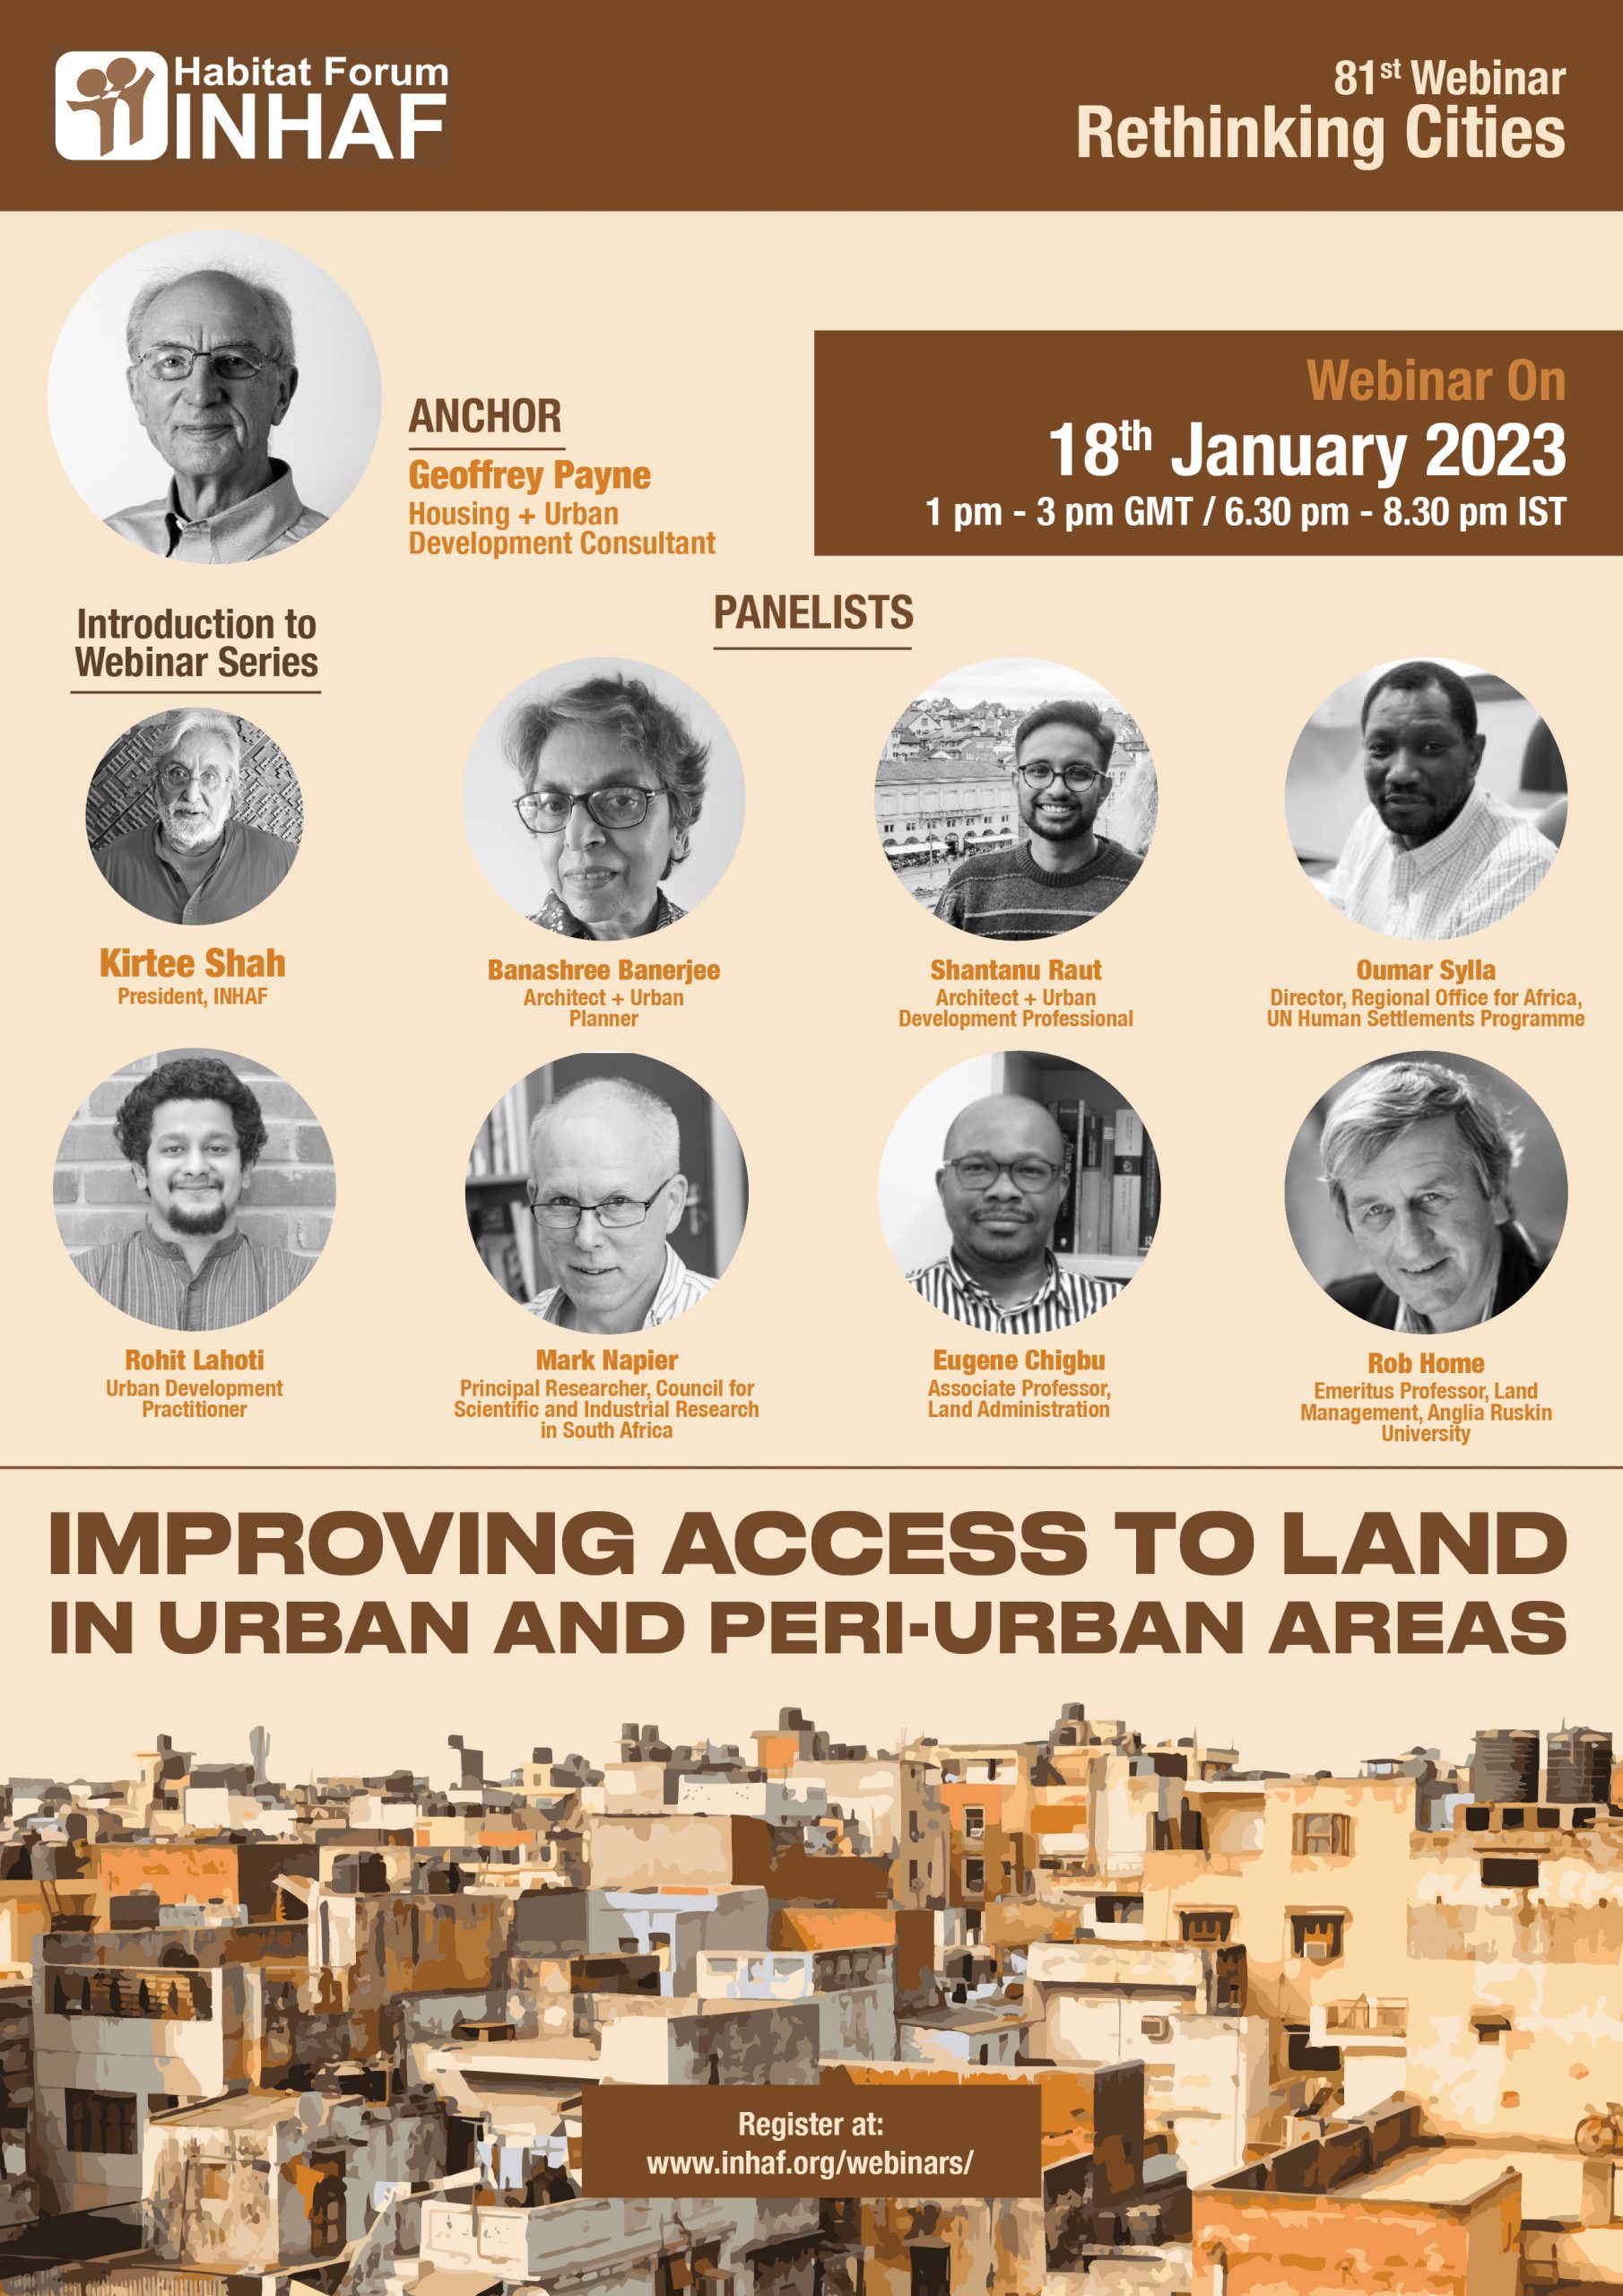 Webinars on improving access to land in urban and peri-urban areas on 18.02.2023 and 25.01.2023!